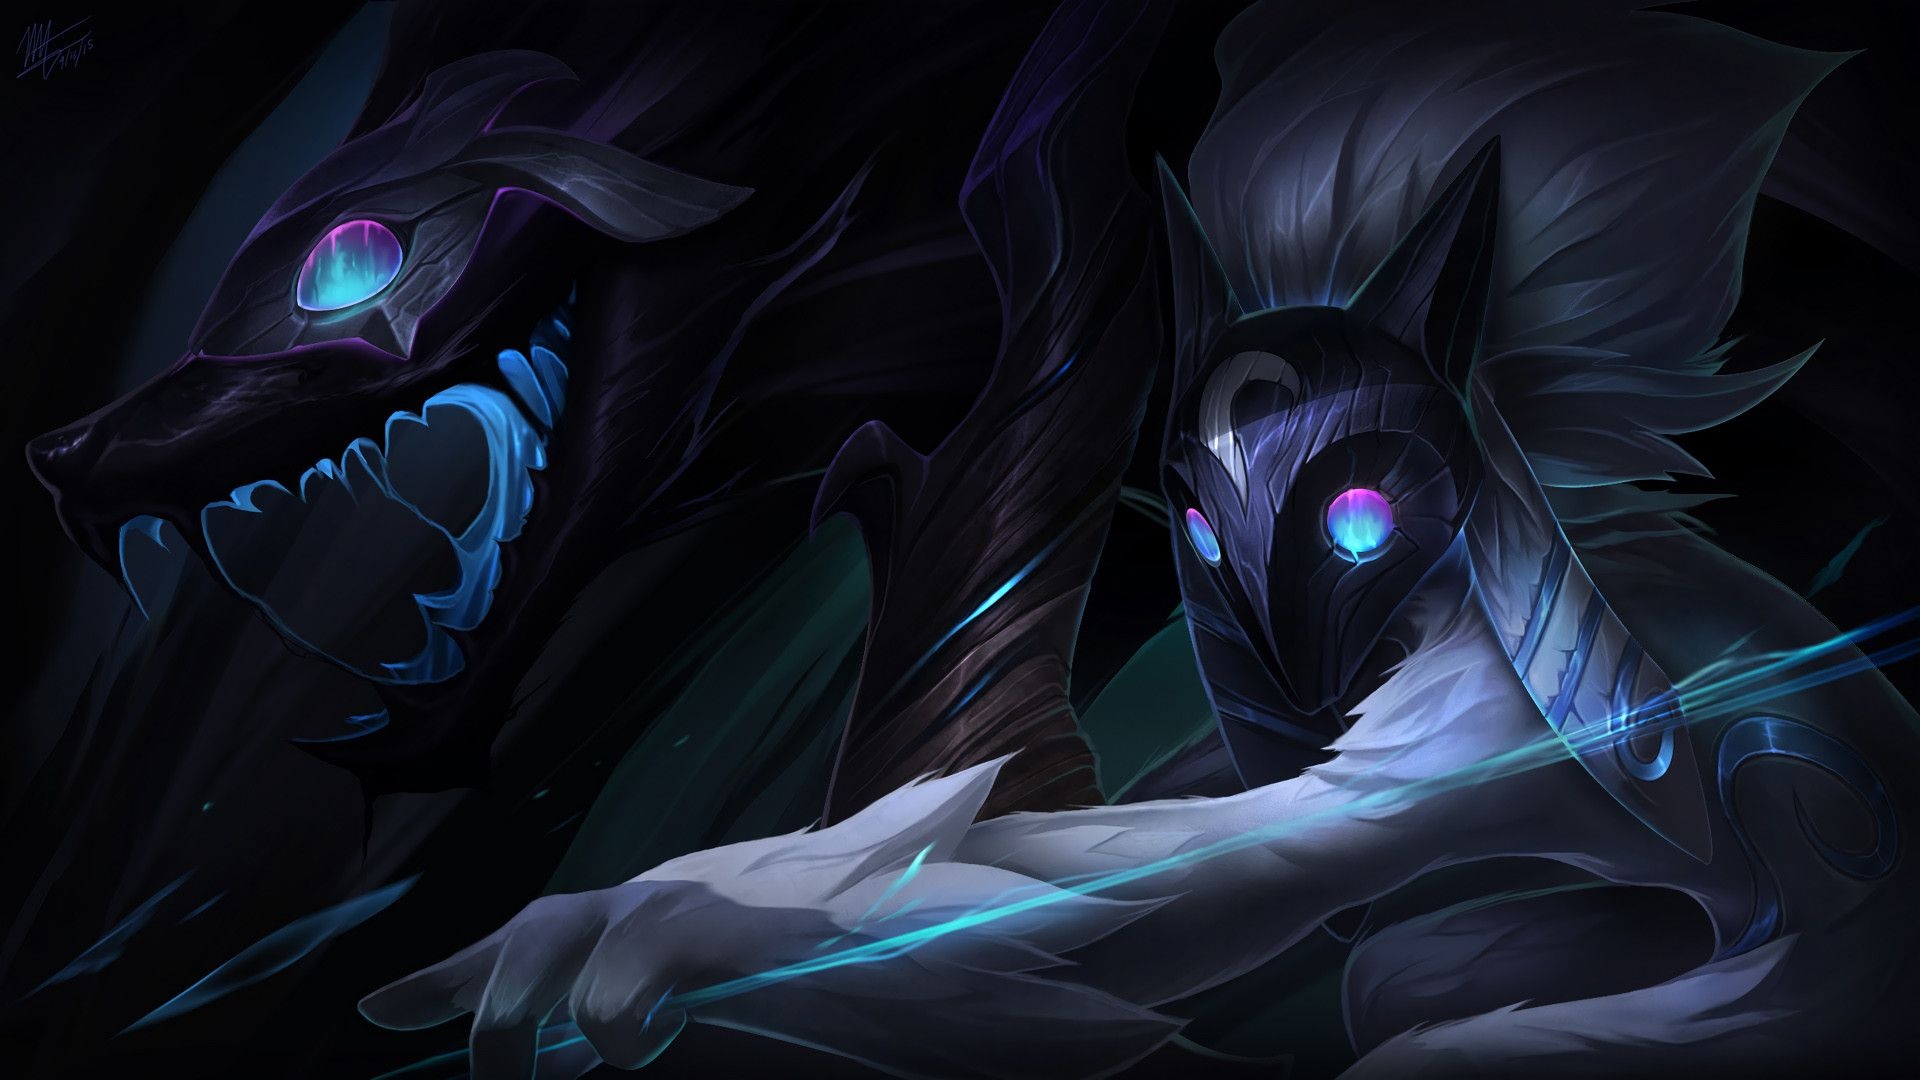 Kindred wallpapers, Top free, Backgrounds, 1920x1080 Full HD Desktop